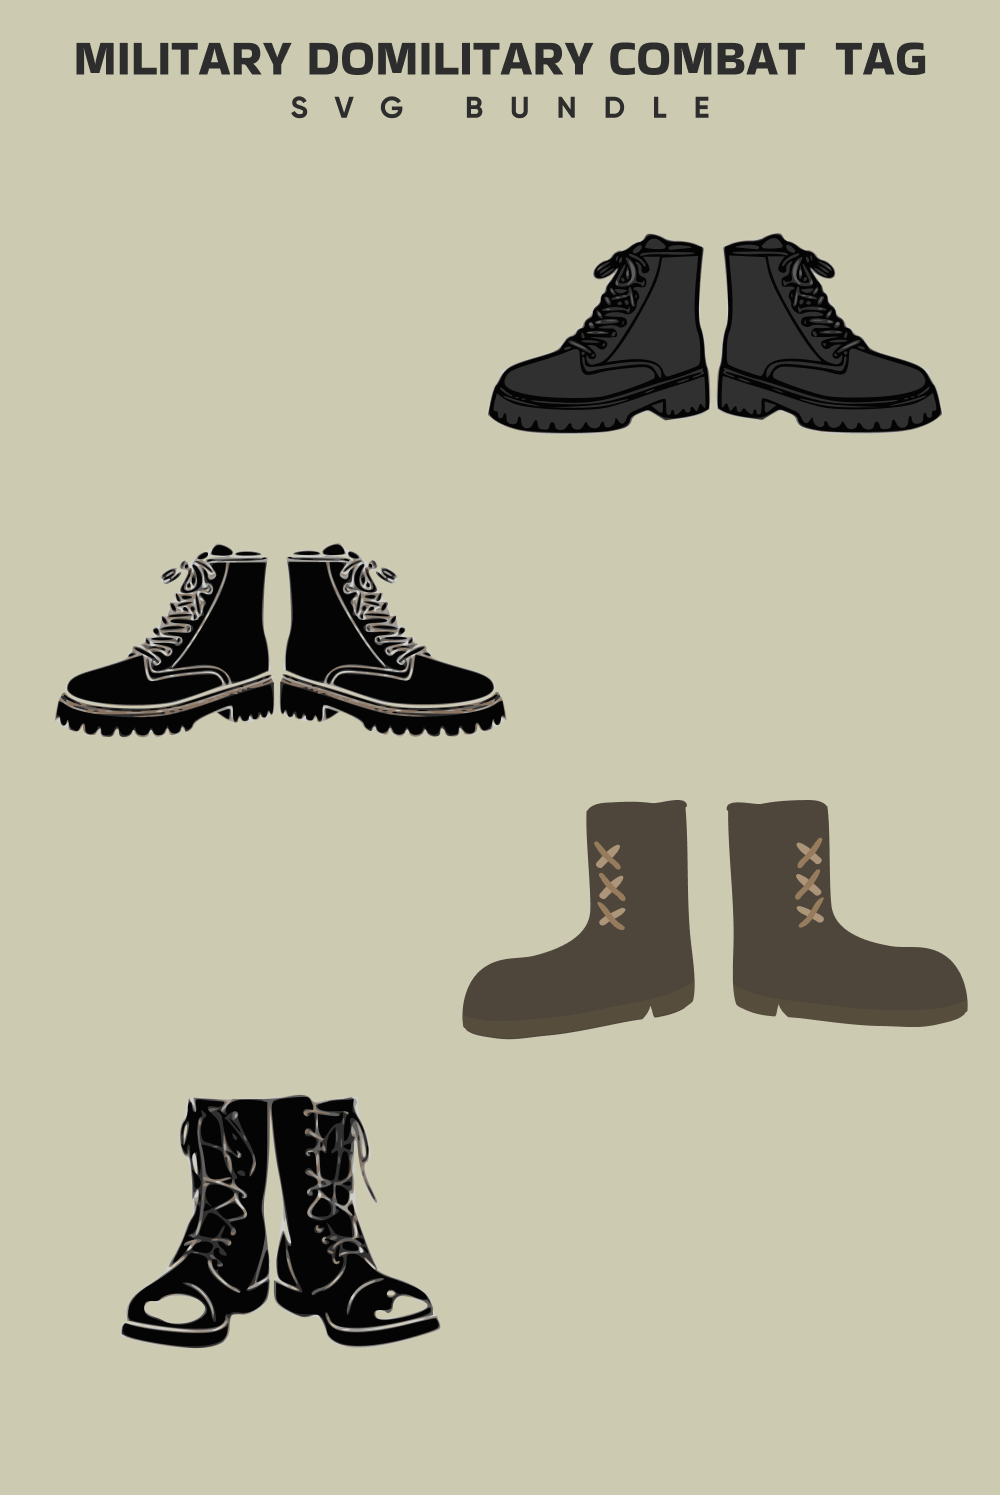 Military boots in gray and black colors.